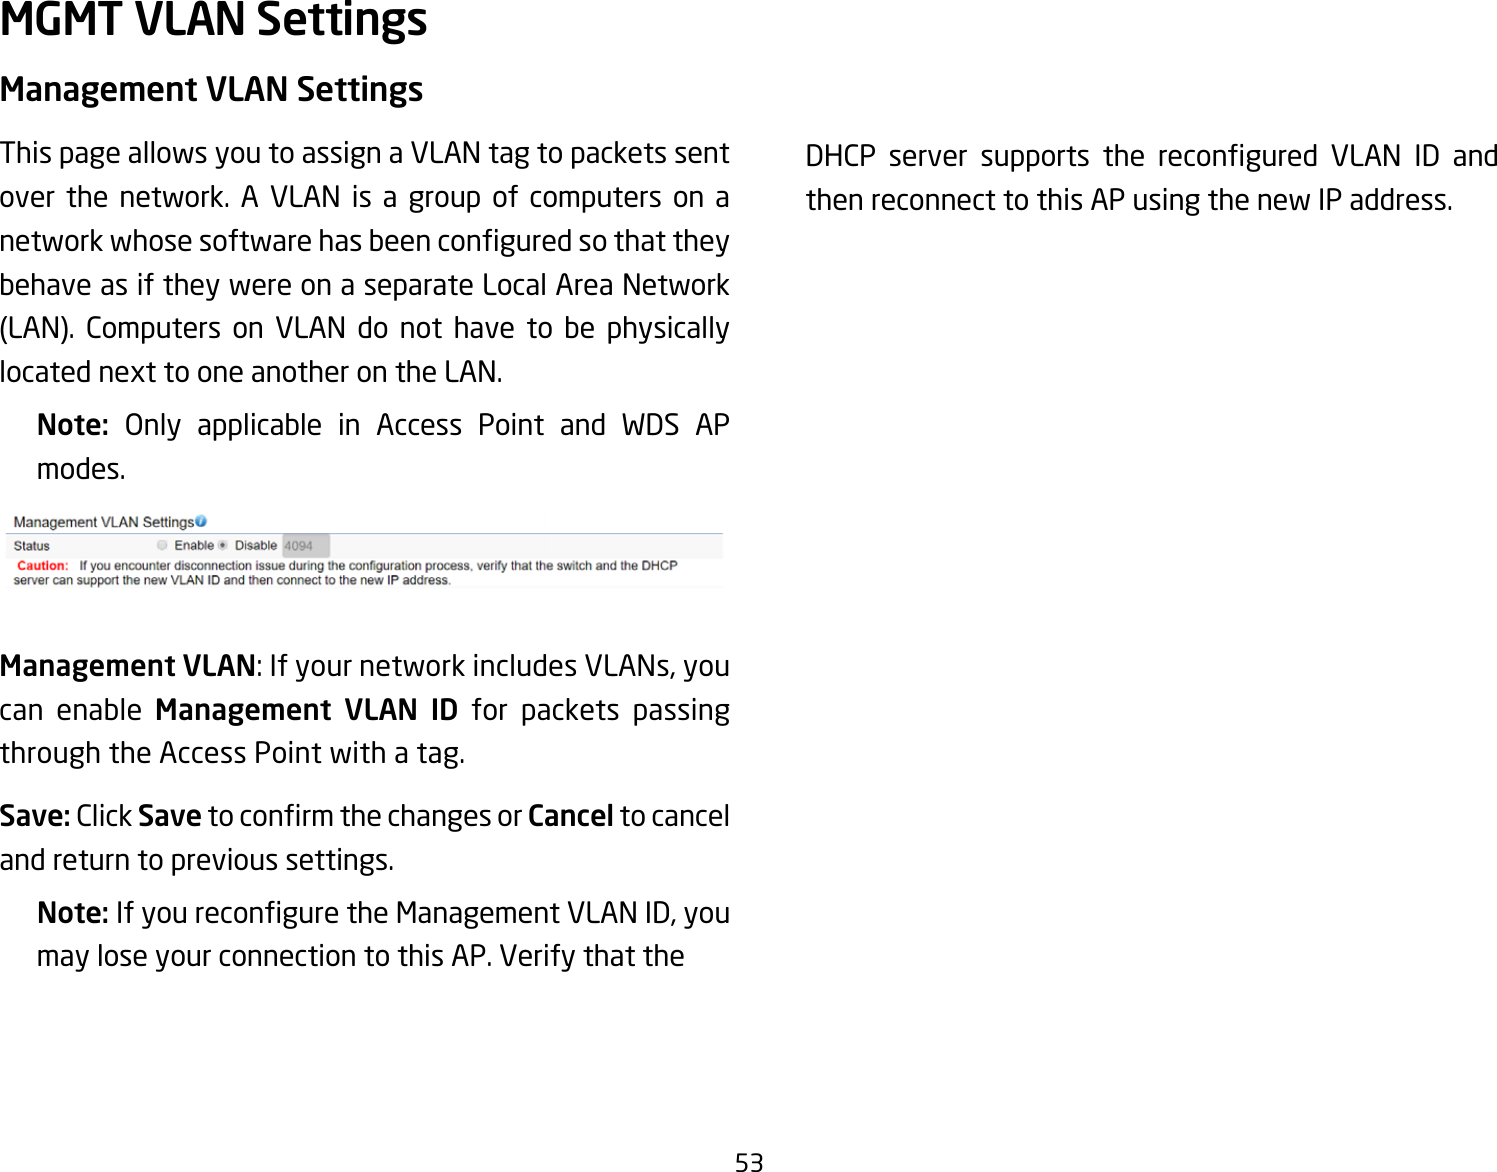 53Management VLAN SettingsThis page allows you to assign a VLAN tag to packets sent over the network. A VLAN is a group of computers on a networkwhosesoftwarehasbeenconguredsothattheybehave as if they were on a separate Local Area Network (LAN). Computers on VLAN do not have to be physicallylocatednexttooneanotherontheLAN.Note:  Only applicable in Access Point and WDS AP modes.Management VLAN:IfyournetworkincludesVLANs,youcan enable Management VLAN ID for packets passing through the Access Point with a tag. Save: Click SavetoconrmthechangesorCancel to cancel and return to previous settings.Note: IfyoureconguretheManagementVLANID,youmay lose your connection to this AP. Verify that the   DHCP server supports the recongured VLAN ID andthen reconnect to this AP using the new IP address. MGMT VLAN Settings